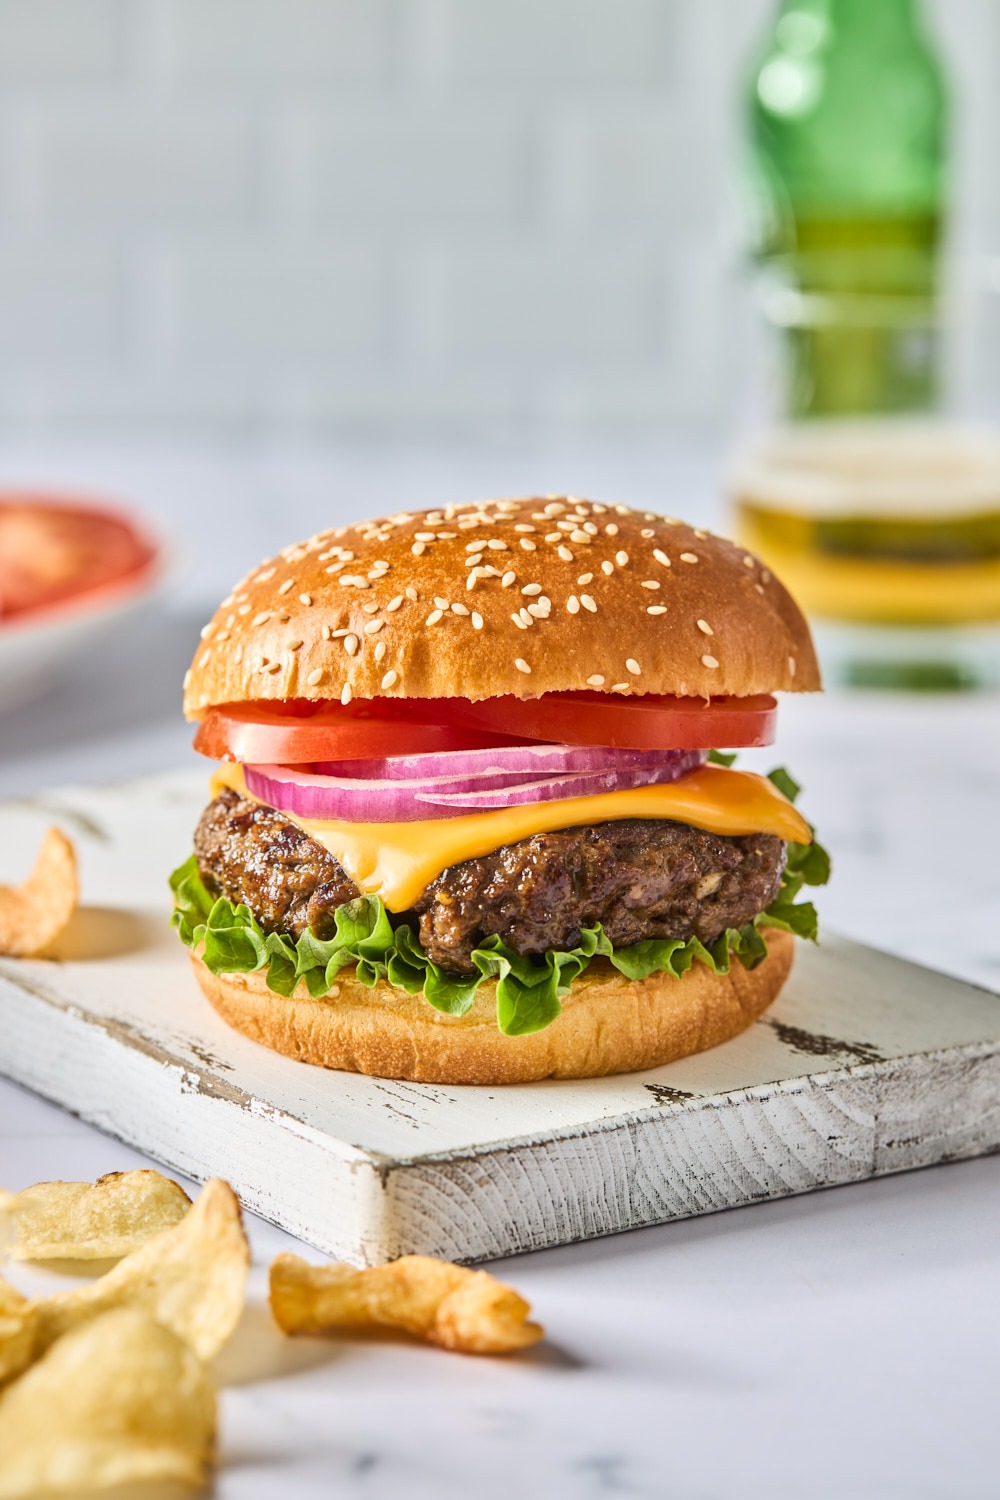 Classic Grilled Cheeseburger